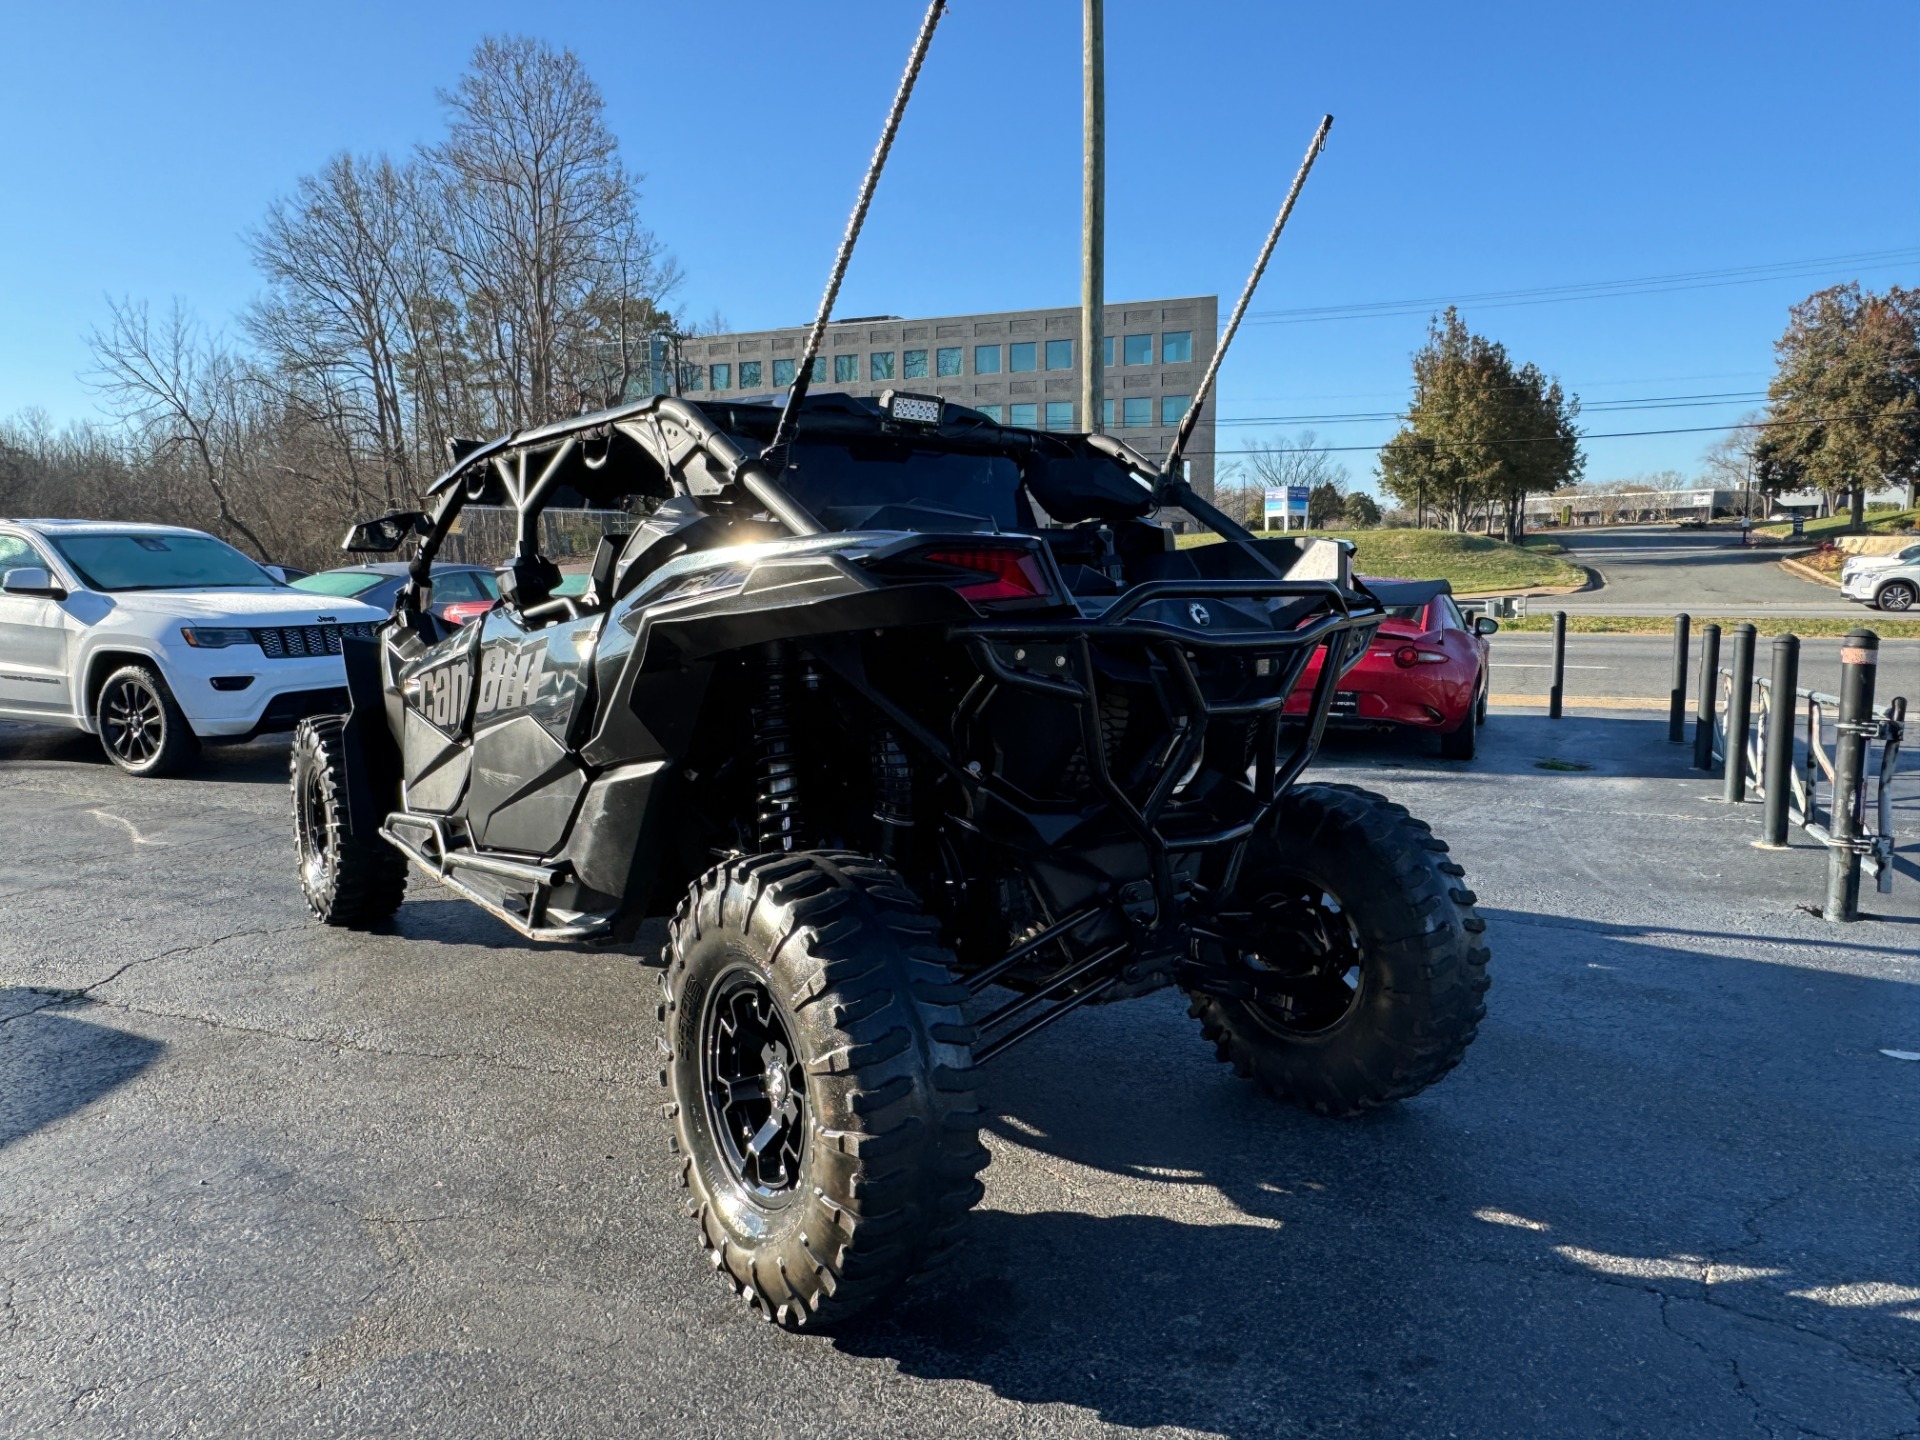 Used 2019 Can-Am Maverick Max XDS 1000 Turbo LIGHTBARS / SOUND SYSTEM / CB RADIO / WHEELS & TIRES for sale $29,500 at Formula Imports in Charlotte NC 28227 4